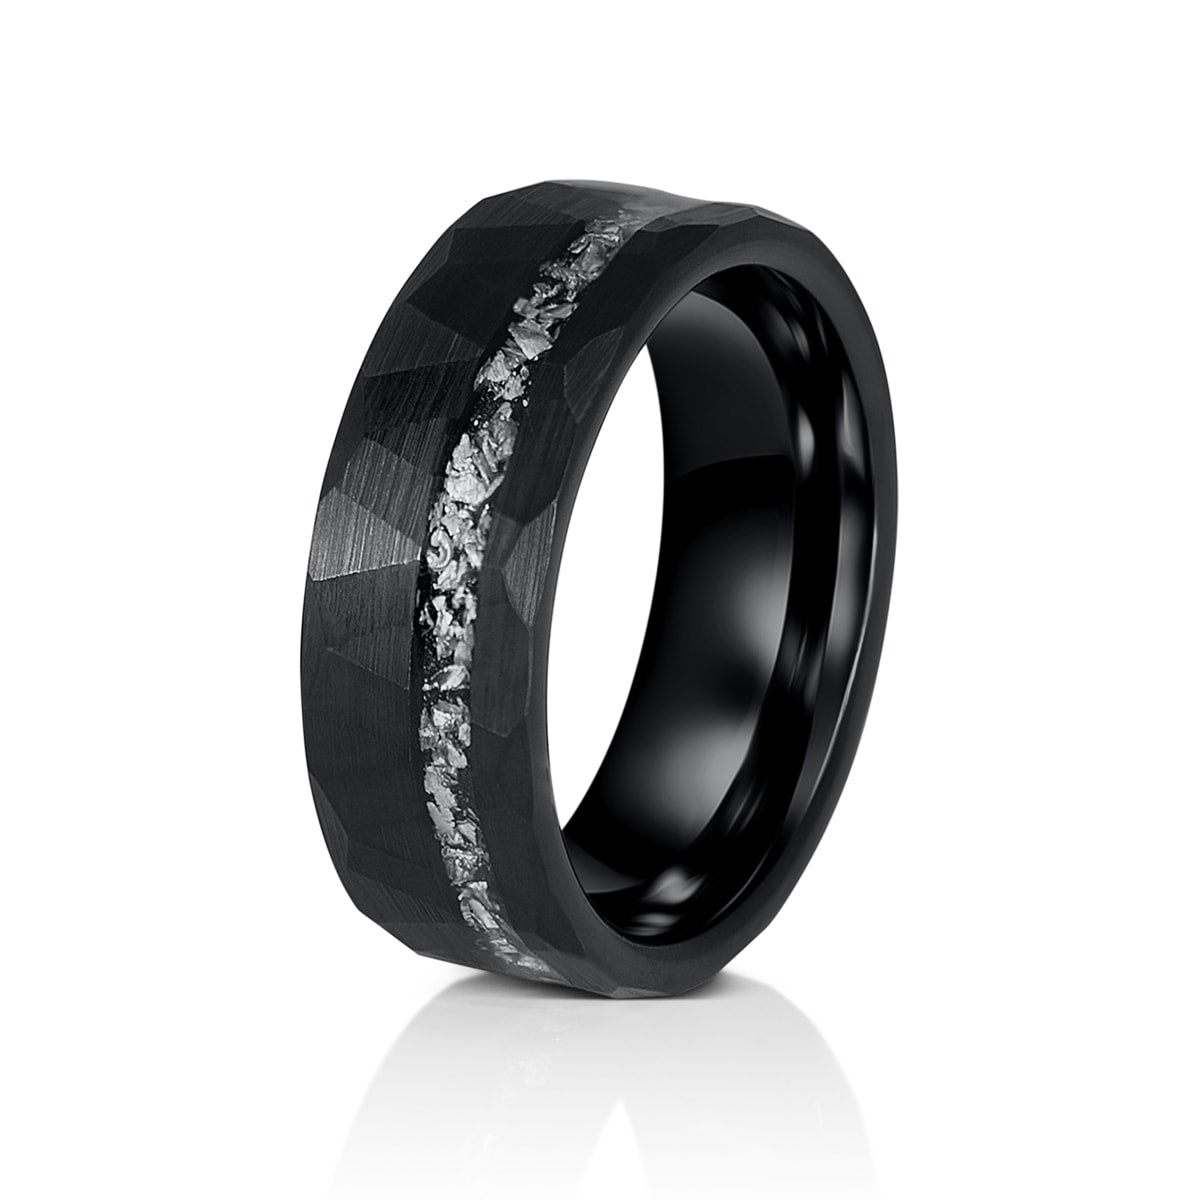 Mens ring with meteorite inlay